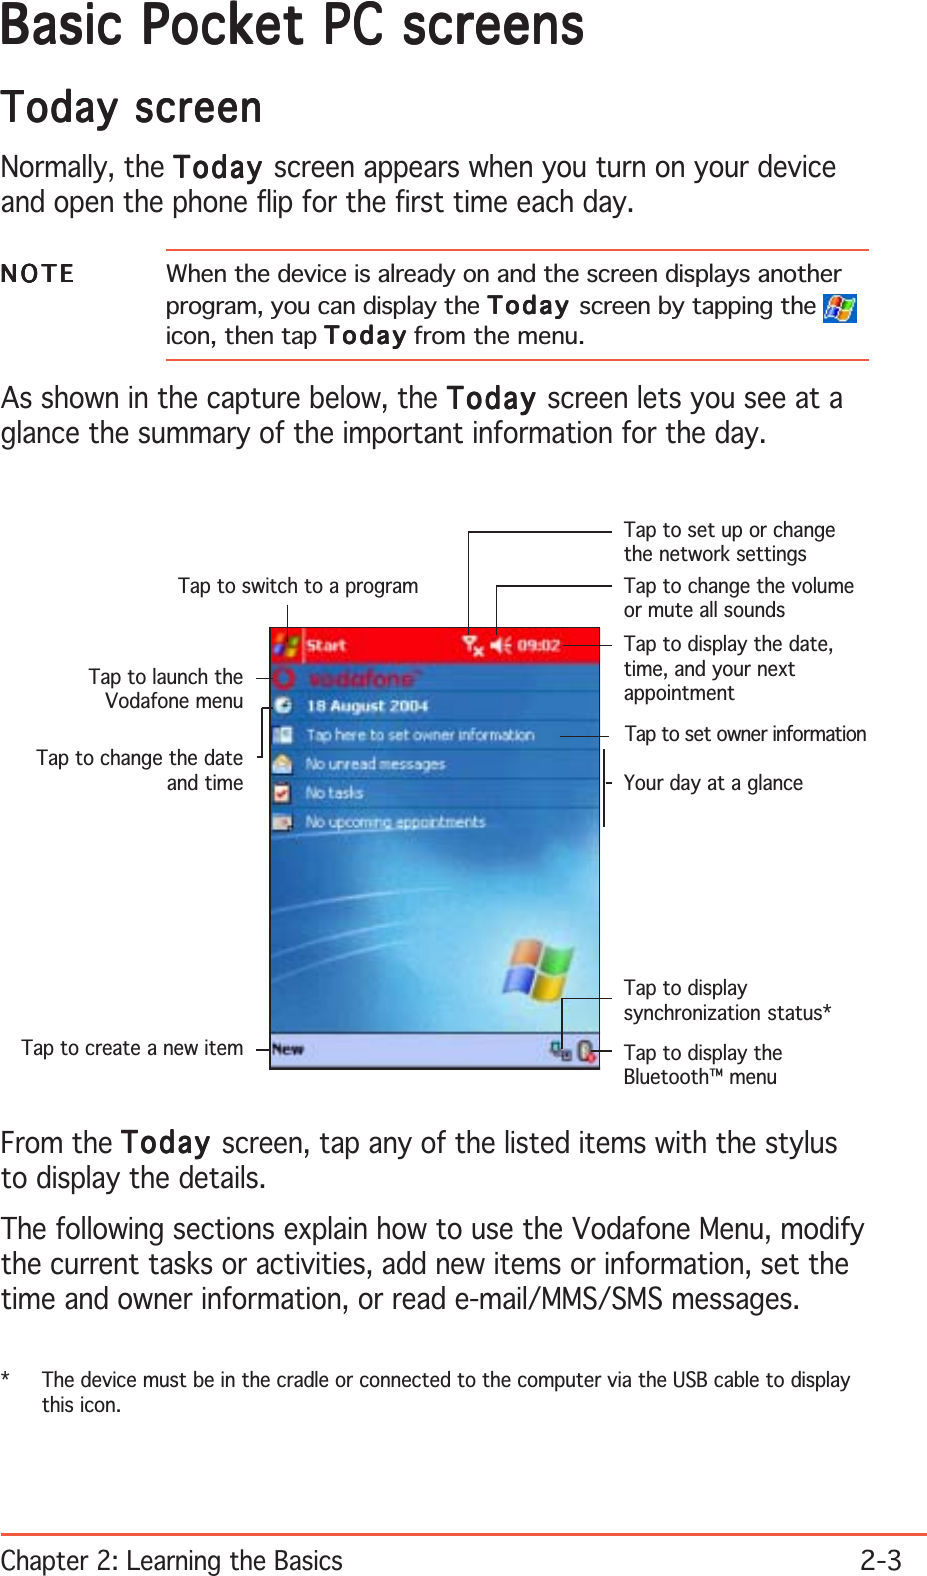 Chapter 2: Learning the Basics2-3Basic Pocket PC screensBasic Pocket PC screensBasic Pocket PC screensBasic Pocket PC screensBasic Pocket PC screensToday screenToday screenToday screenToday screenToday screenNormally, the TodayTodayTodayTodayToday screen appears when you turn on your deviceand open the phone flip for the first time each day.NOTENOTENOTENOTEN O T E When the device is already on and the screen displays anotherprogram, you can display the TodayTodayTodayTodayT o d a y screen by tapping the icon, then tap TodayTodayTodayTodayT o d a y from the menu.As shown in the capture below, the TodayTodayTodayTodayToday screen lets you see at aglance the summary of the important information for the day.From the TodayTodayTodayTodayToday screen, tap any of the listed items with the stylusto display the details.The following sections explain how to use the Vodafone Menu, modifythe current tasks or activities, add new items or information, set thetime and owner information, or read e-mail/MMS/SMS messages.Tap to switch to a programTap to set up or changethe network settingsTap to change the volumeor mute all soundsTap to display the date,time, and your nextappointmentYour day at a glanceTap to create a new itemTap to change the dateand timeTap to set owner informationTap to display theBluetooth™ menuTap to displaysynchronization status*Tap to launch theVodafone menu* The device must be in the cradle or connected to the computer via the USB cable to displaythis icon.